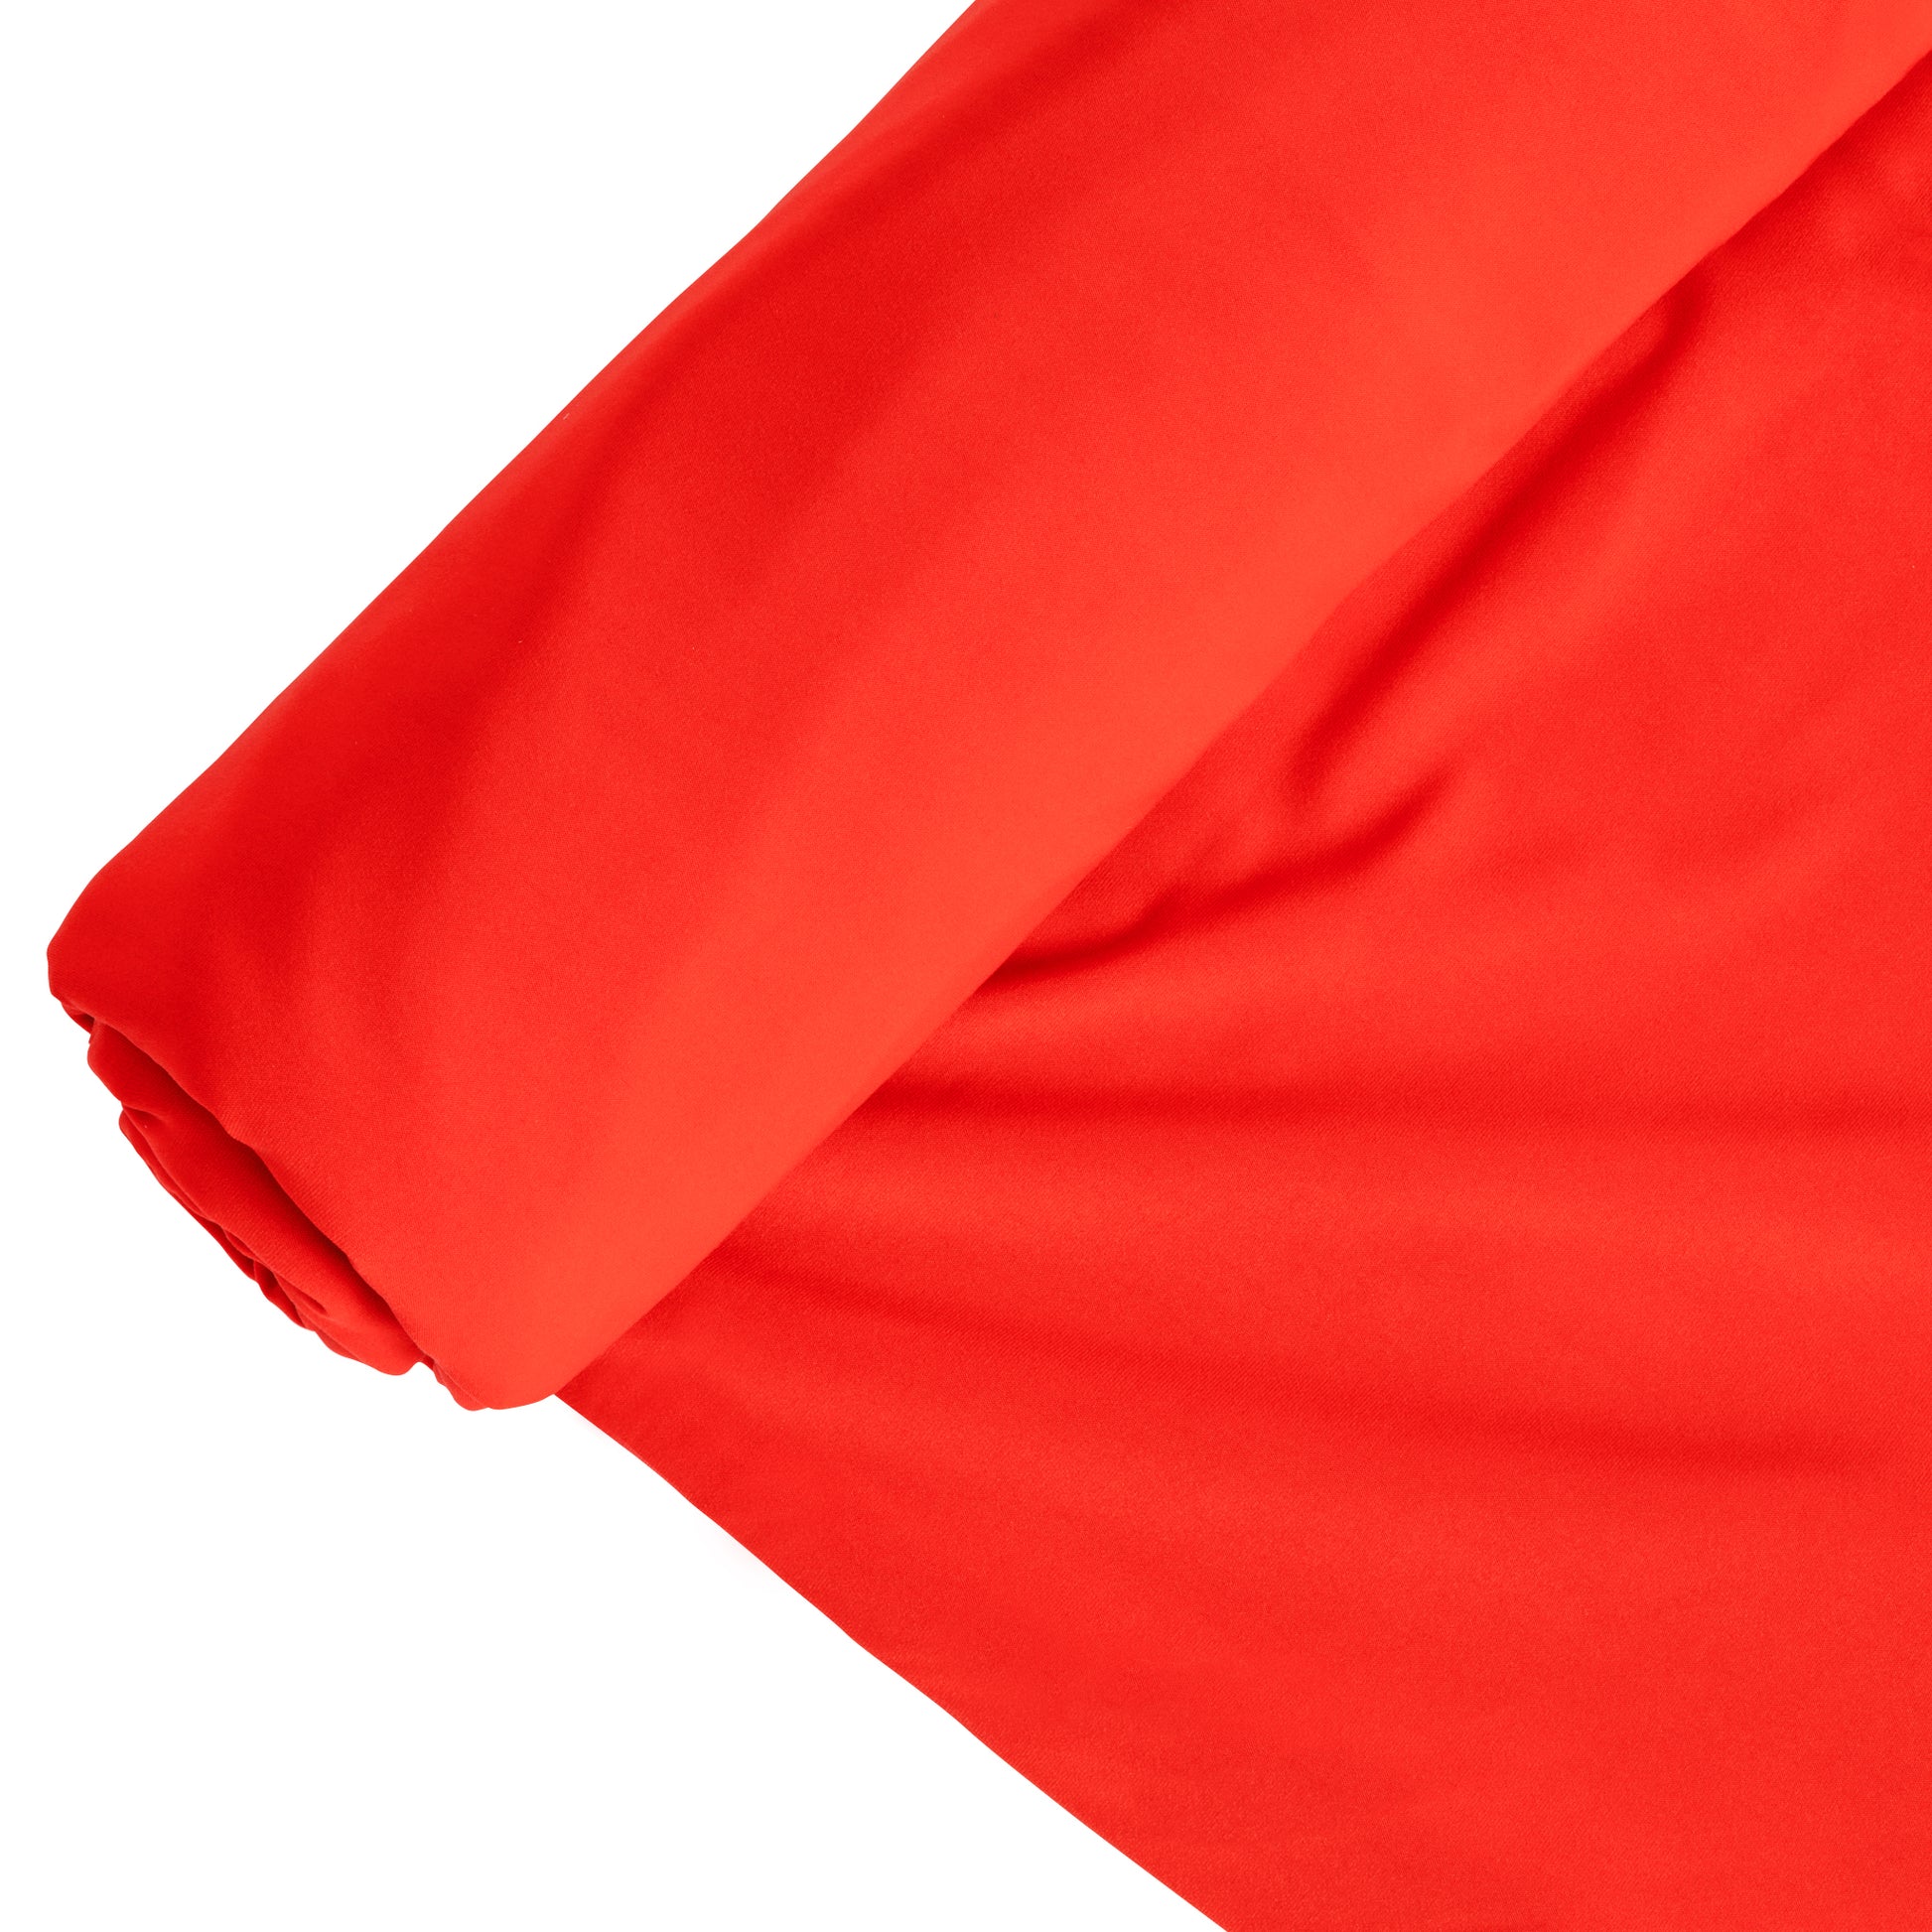 wholesale red rayon spandex fabric